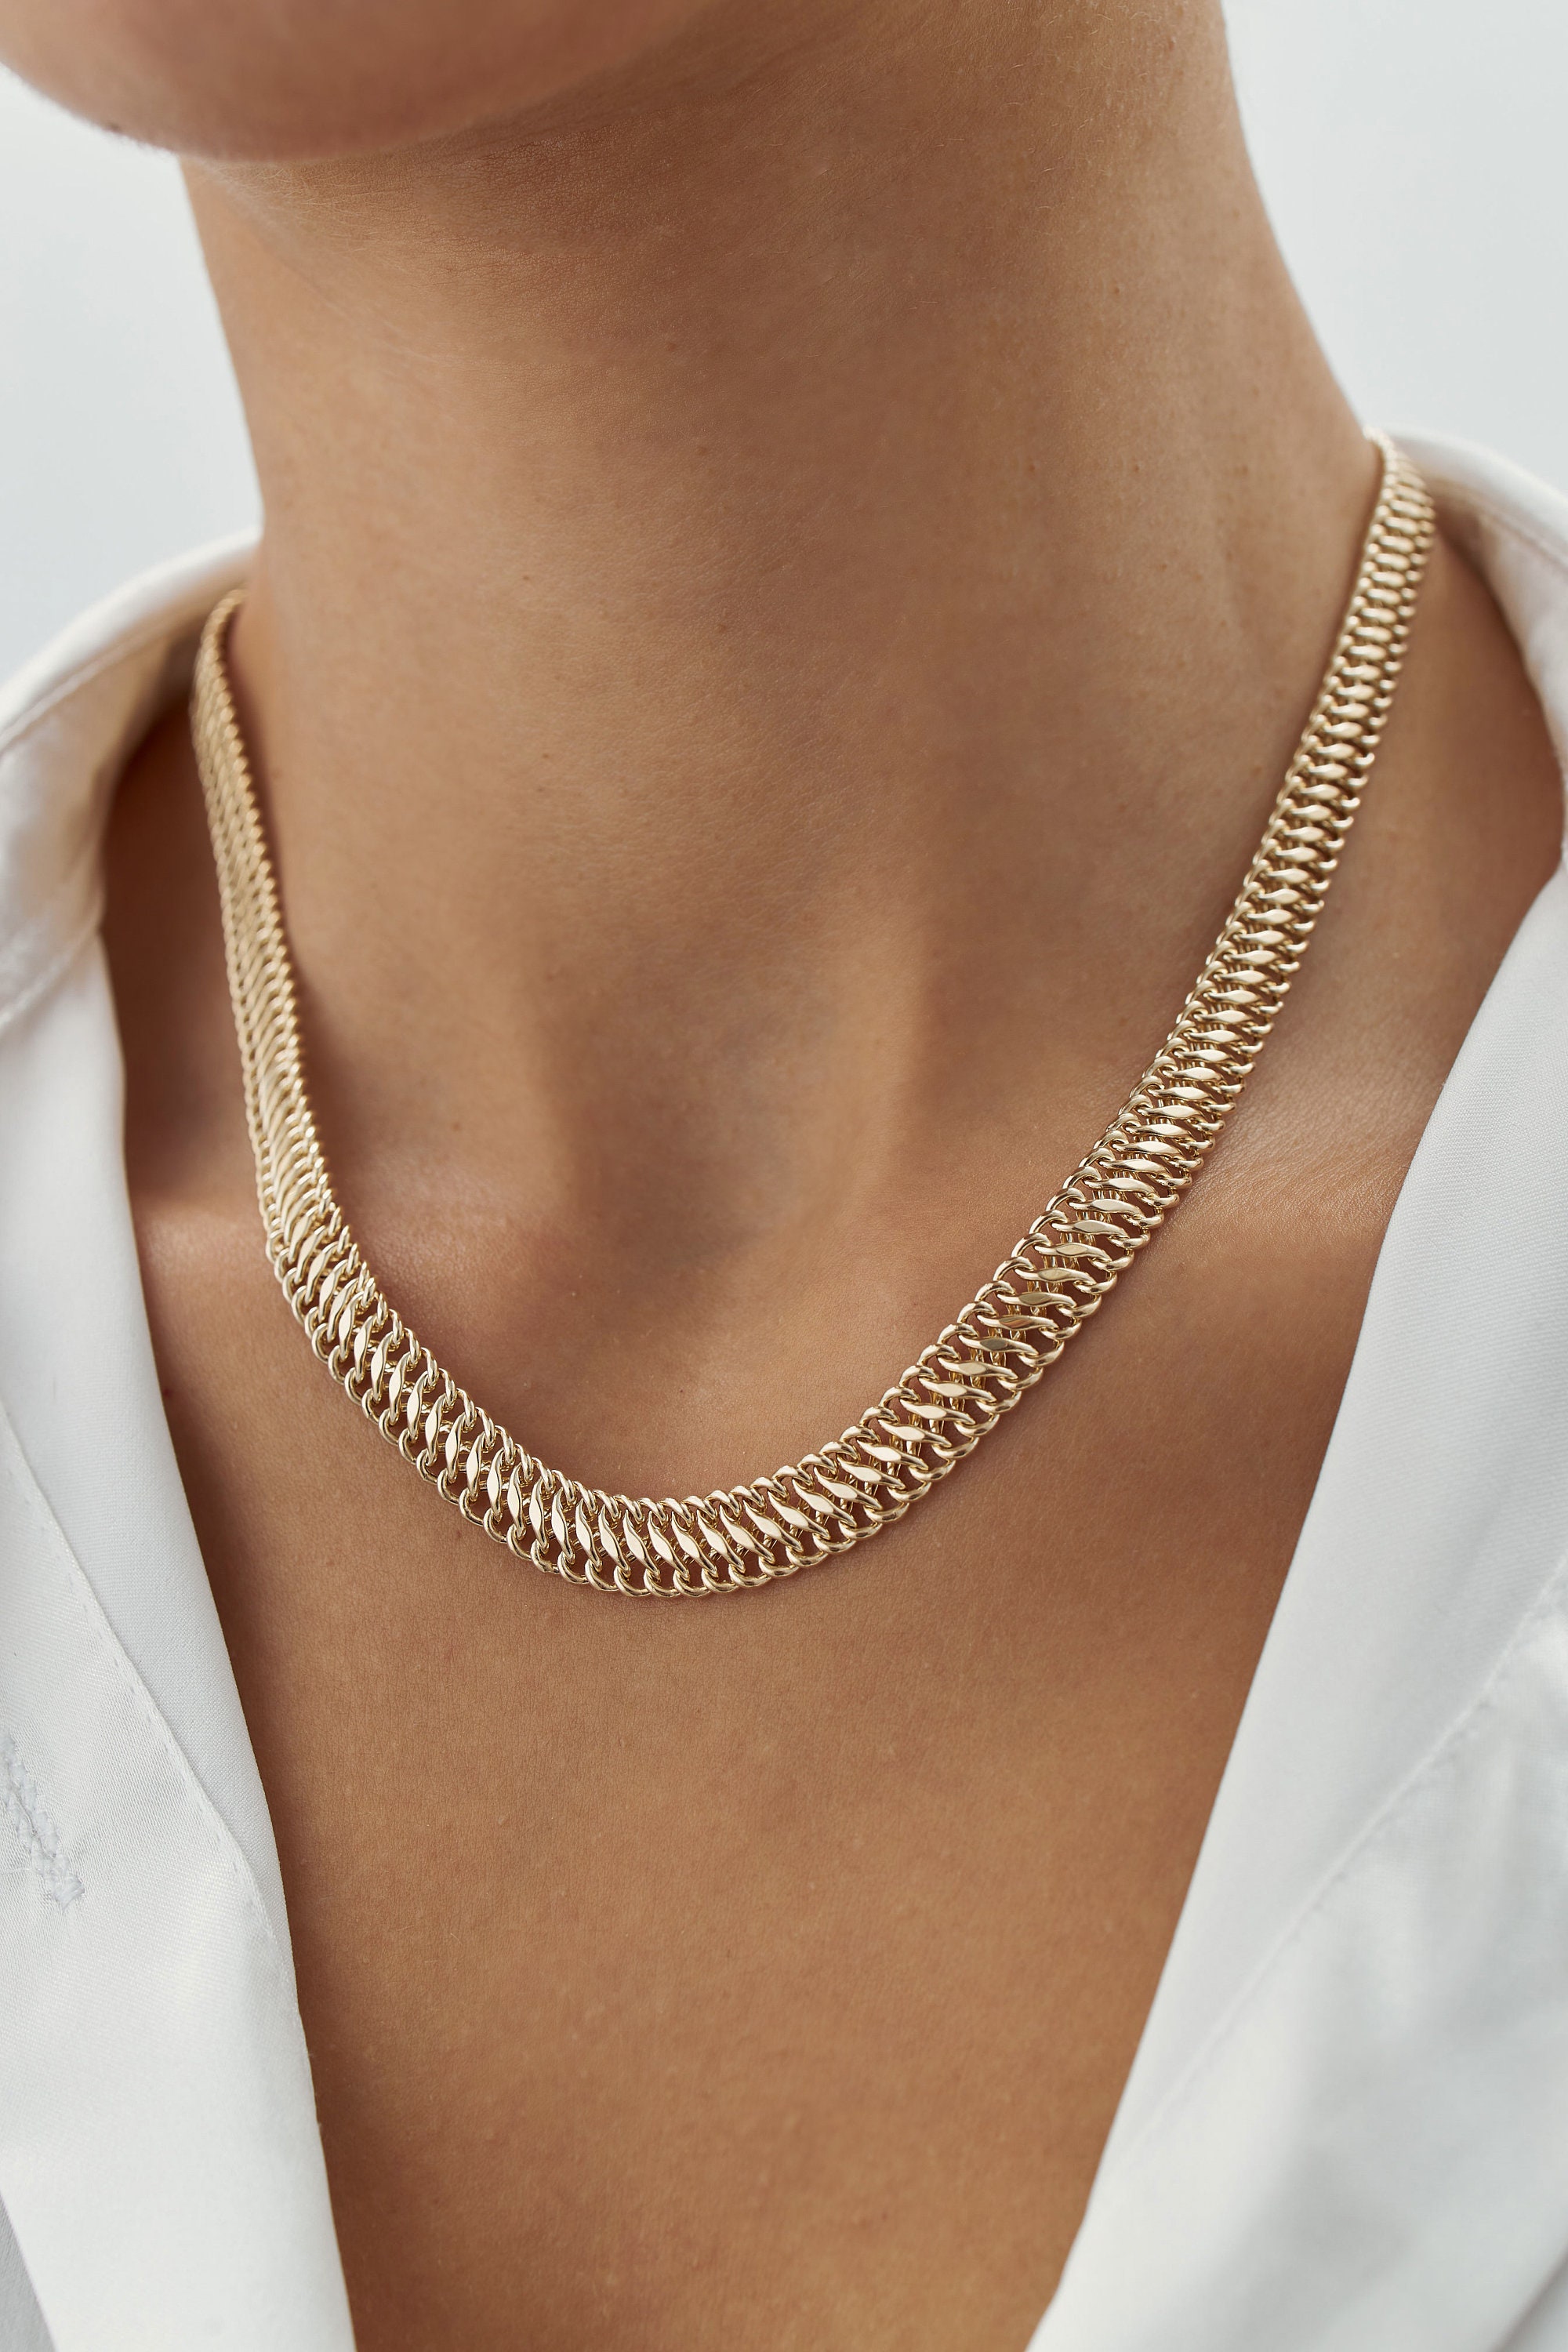 14K Gold Double Curb Chain Necklace, Vienna Chain Necklace, Armoured Chain,  Everyday Gold Jewelry, Minimal Jewelry, Gift for Her, Bold